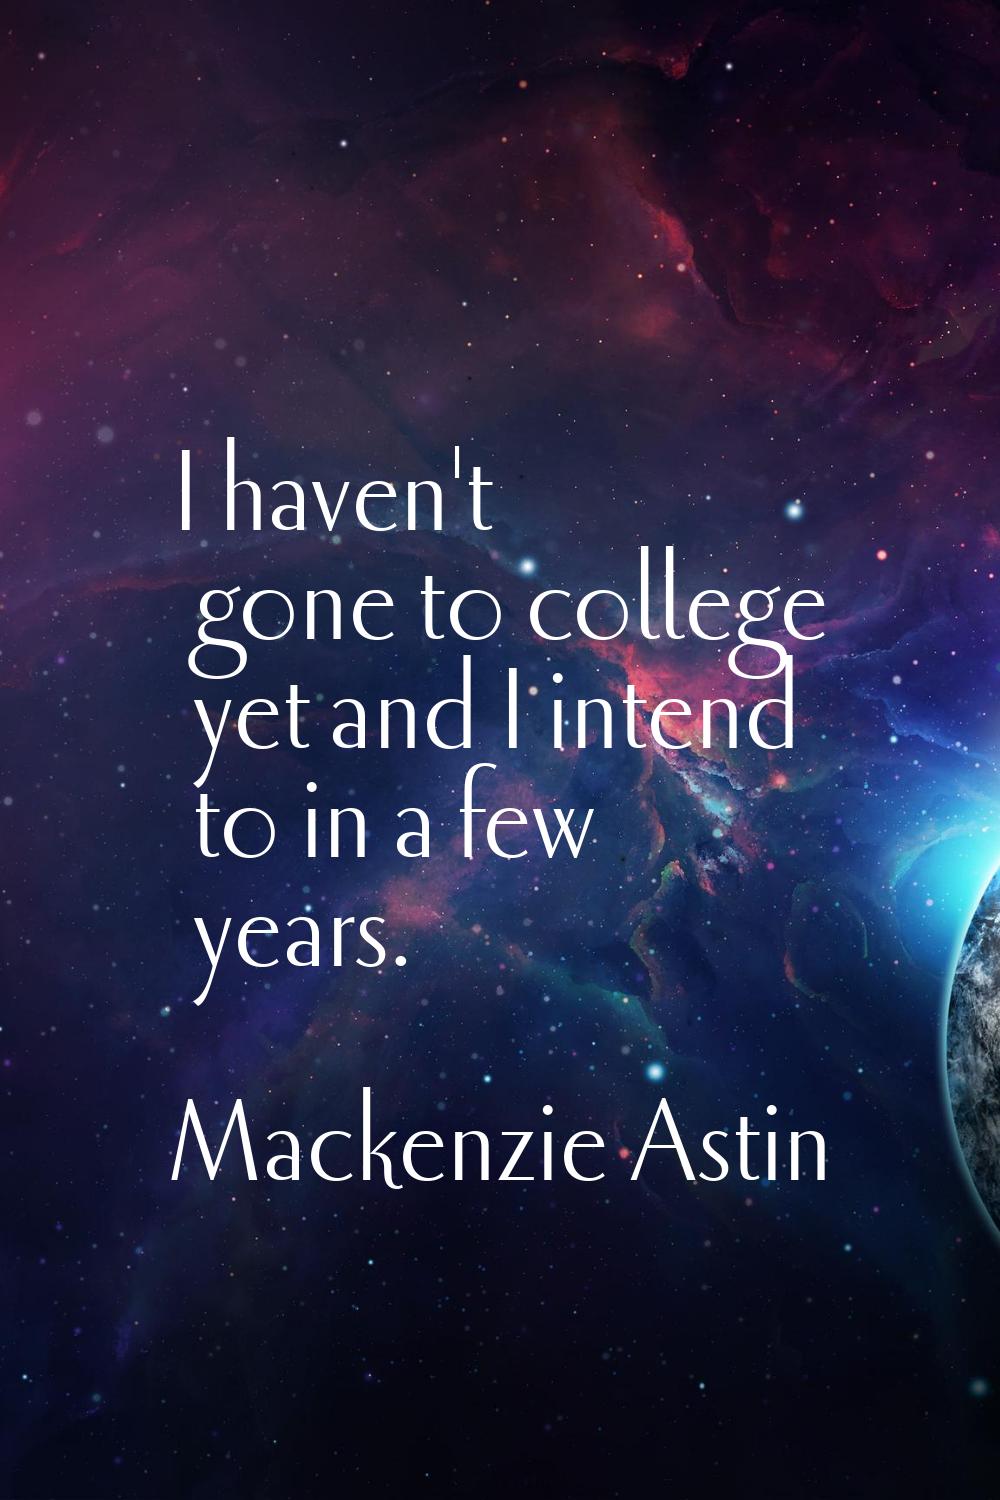 I haven't gone to college yet and I intend to in a few years.